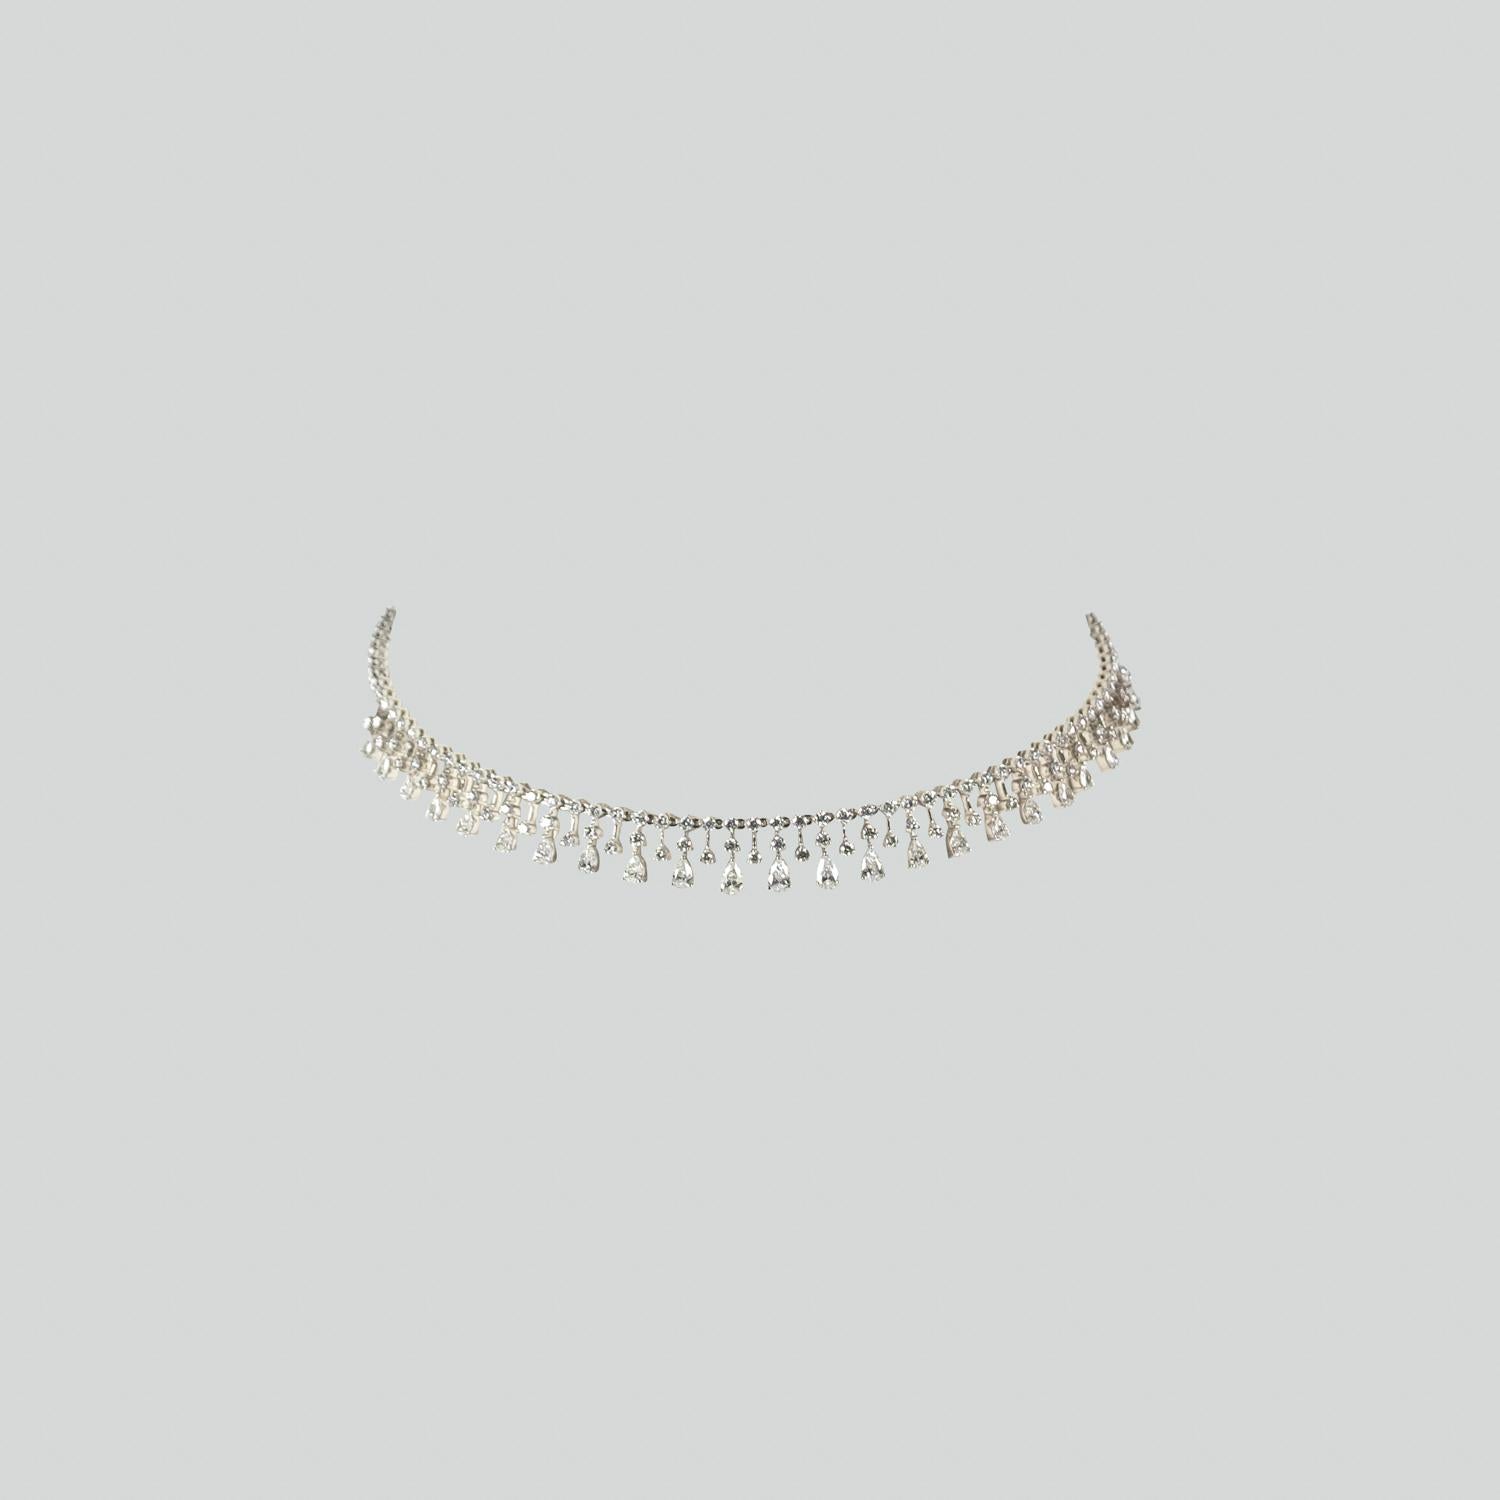 Graduating pear shape diamonds from 0.25 carats to 0.10 carats, in combination with 0.05 carat round diamonds. This choker is made in 18k white gold, and has a self adjustable ball chain mechanism. 

Kamyen's Classic Pret-a-Porter Choker!